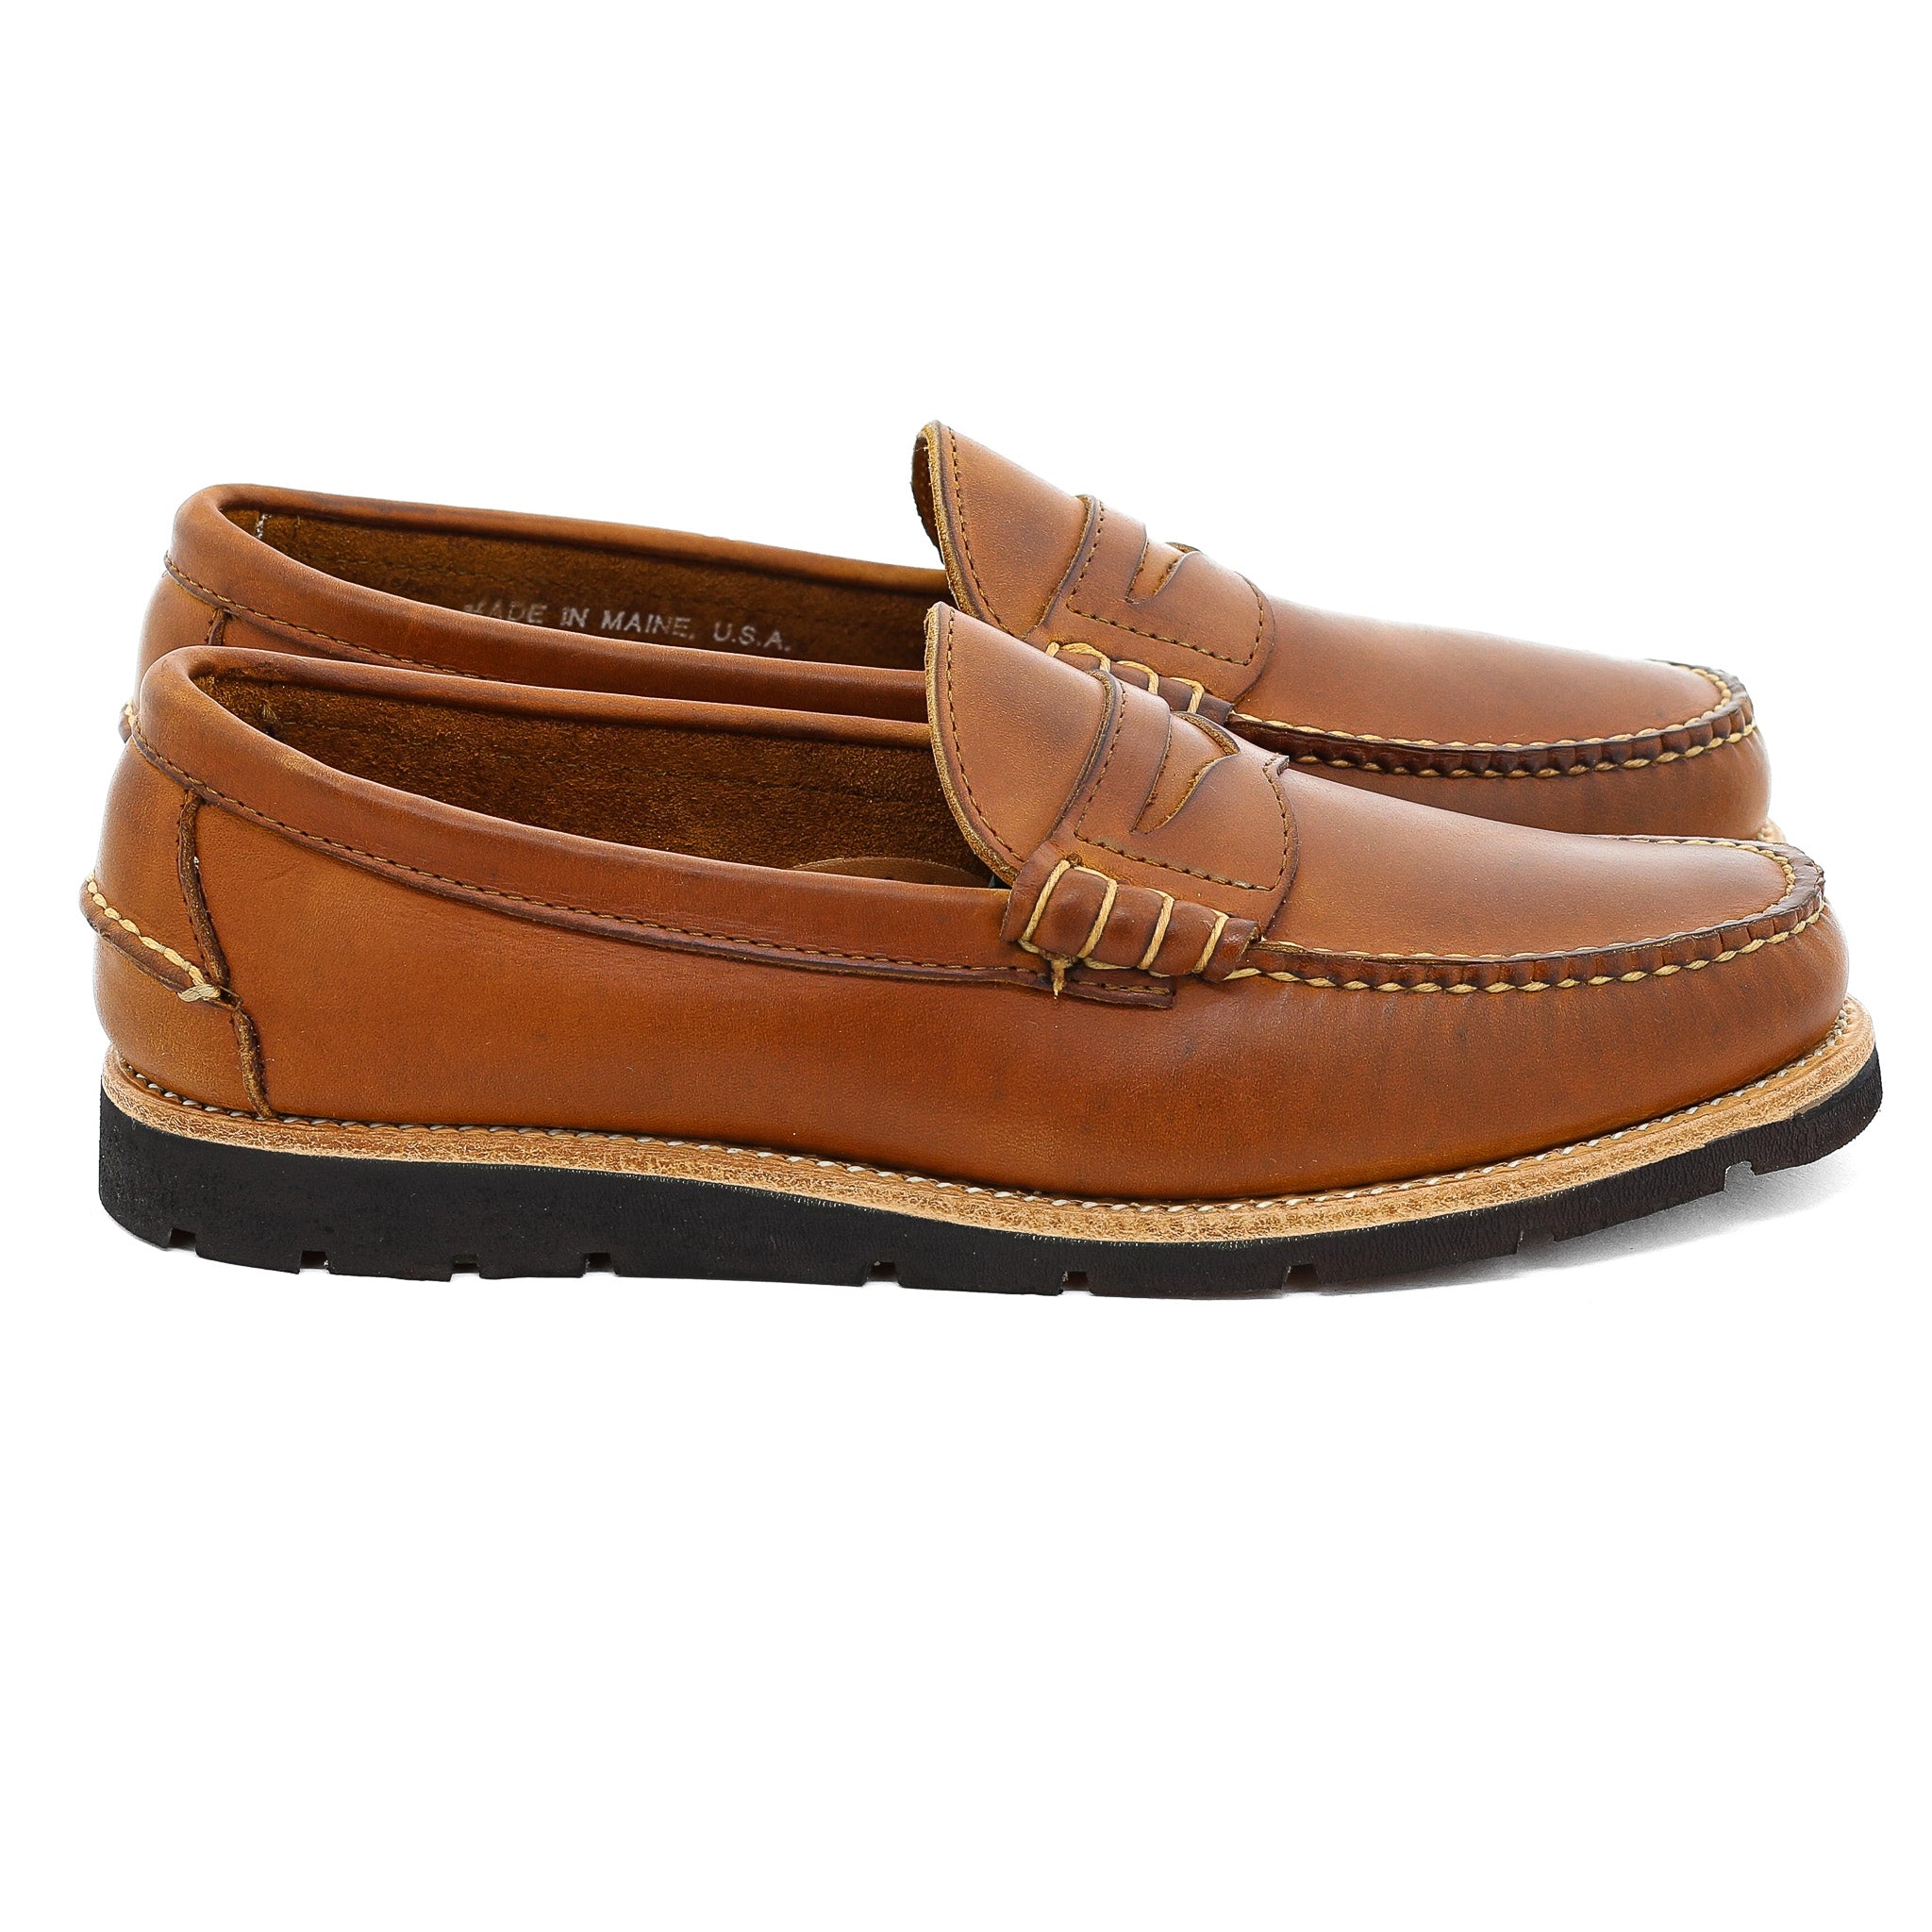 Weltline Penny Loafers - Dark Brown Calf, Rancourt & Co.